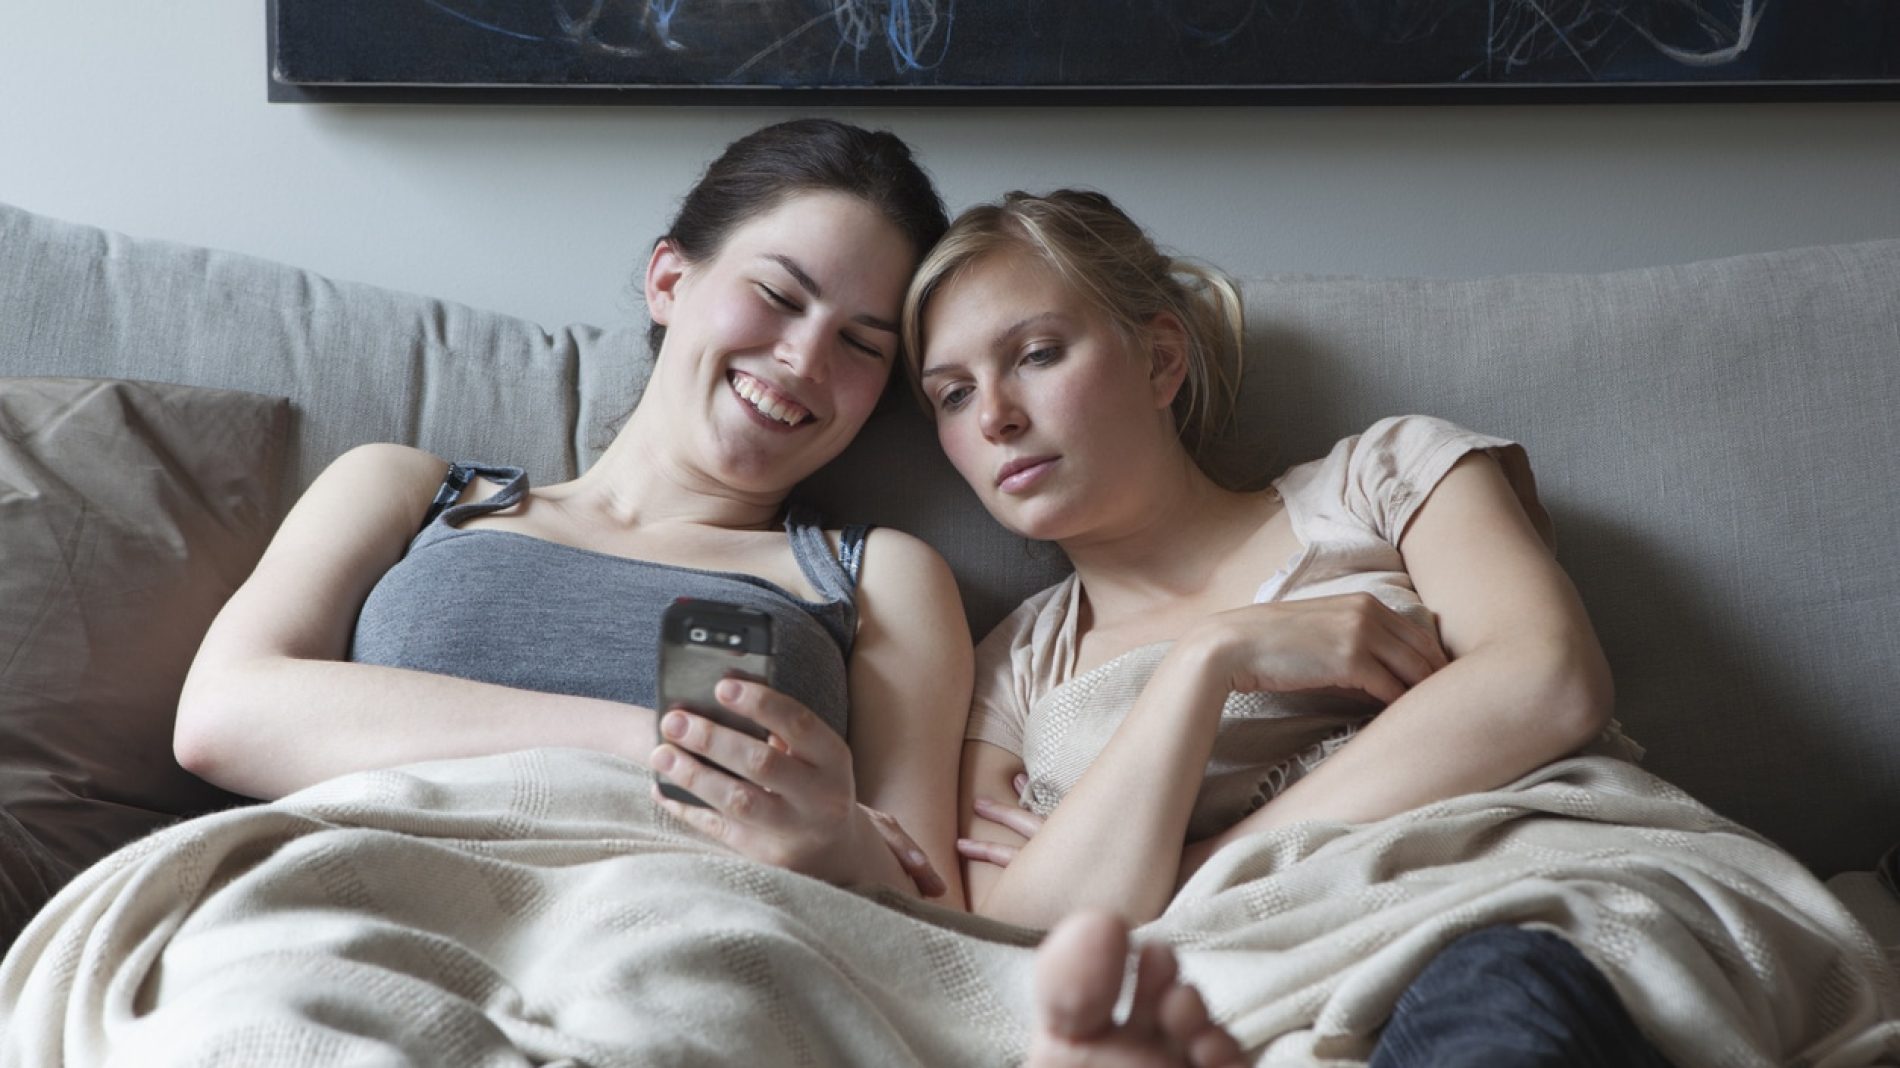 2 young women sit on a couch together looking at a phone